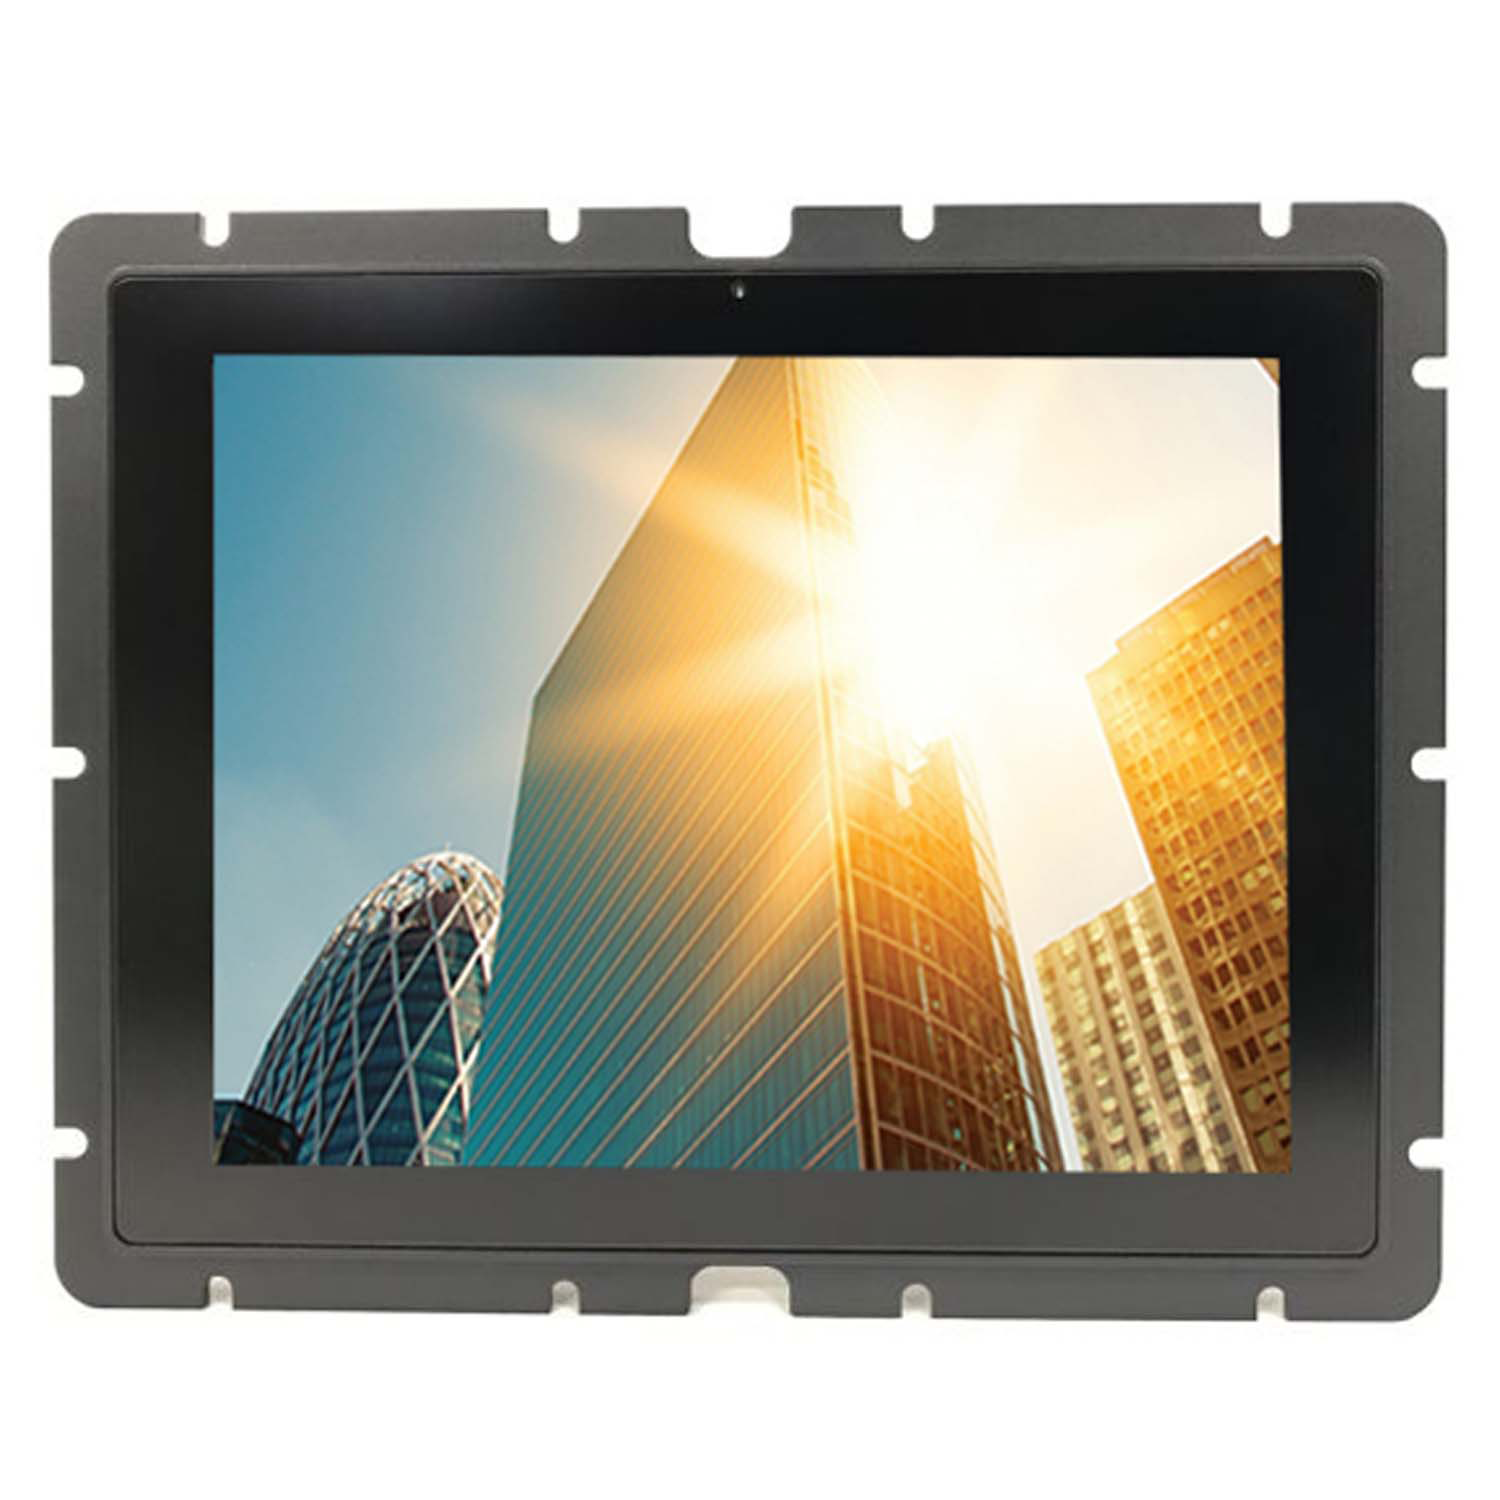 INDUSTRIAL OPEN FRAME HIGH BRIGHT TOUCH MONITOR KEETOUCH 10,4’’ KOT-0104U-CA4PH (KT-104-CHWS001)